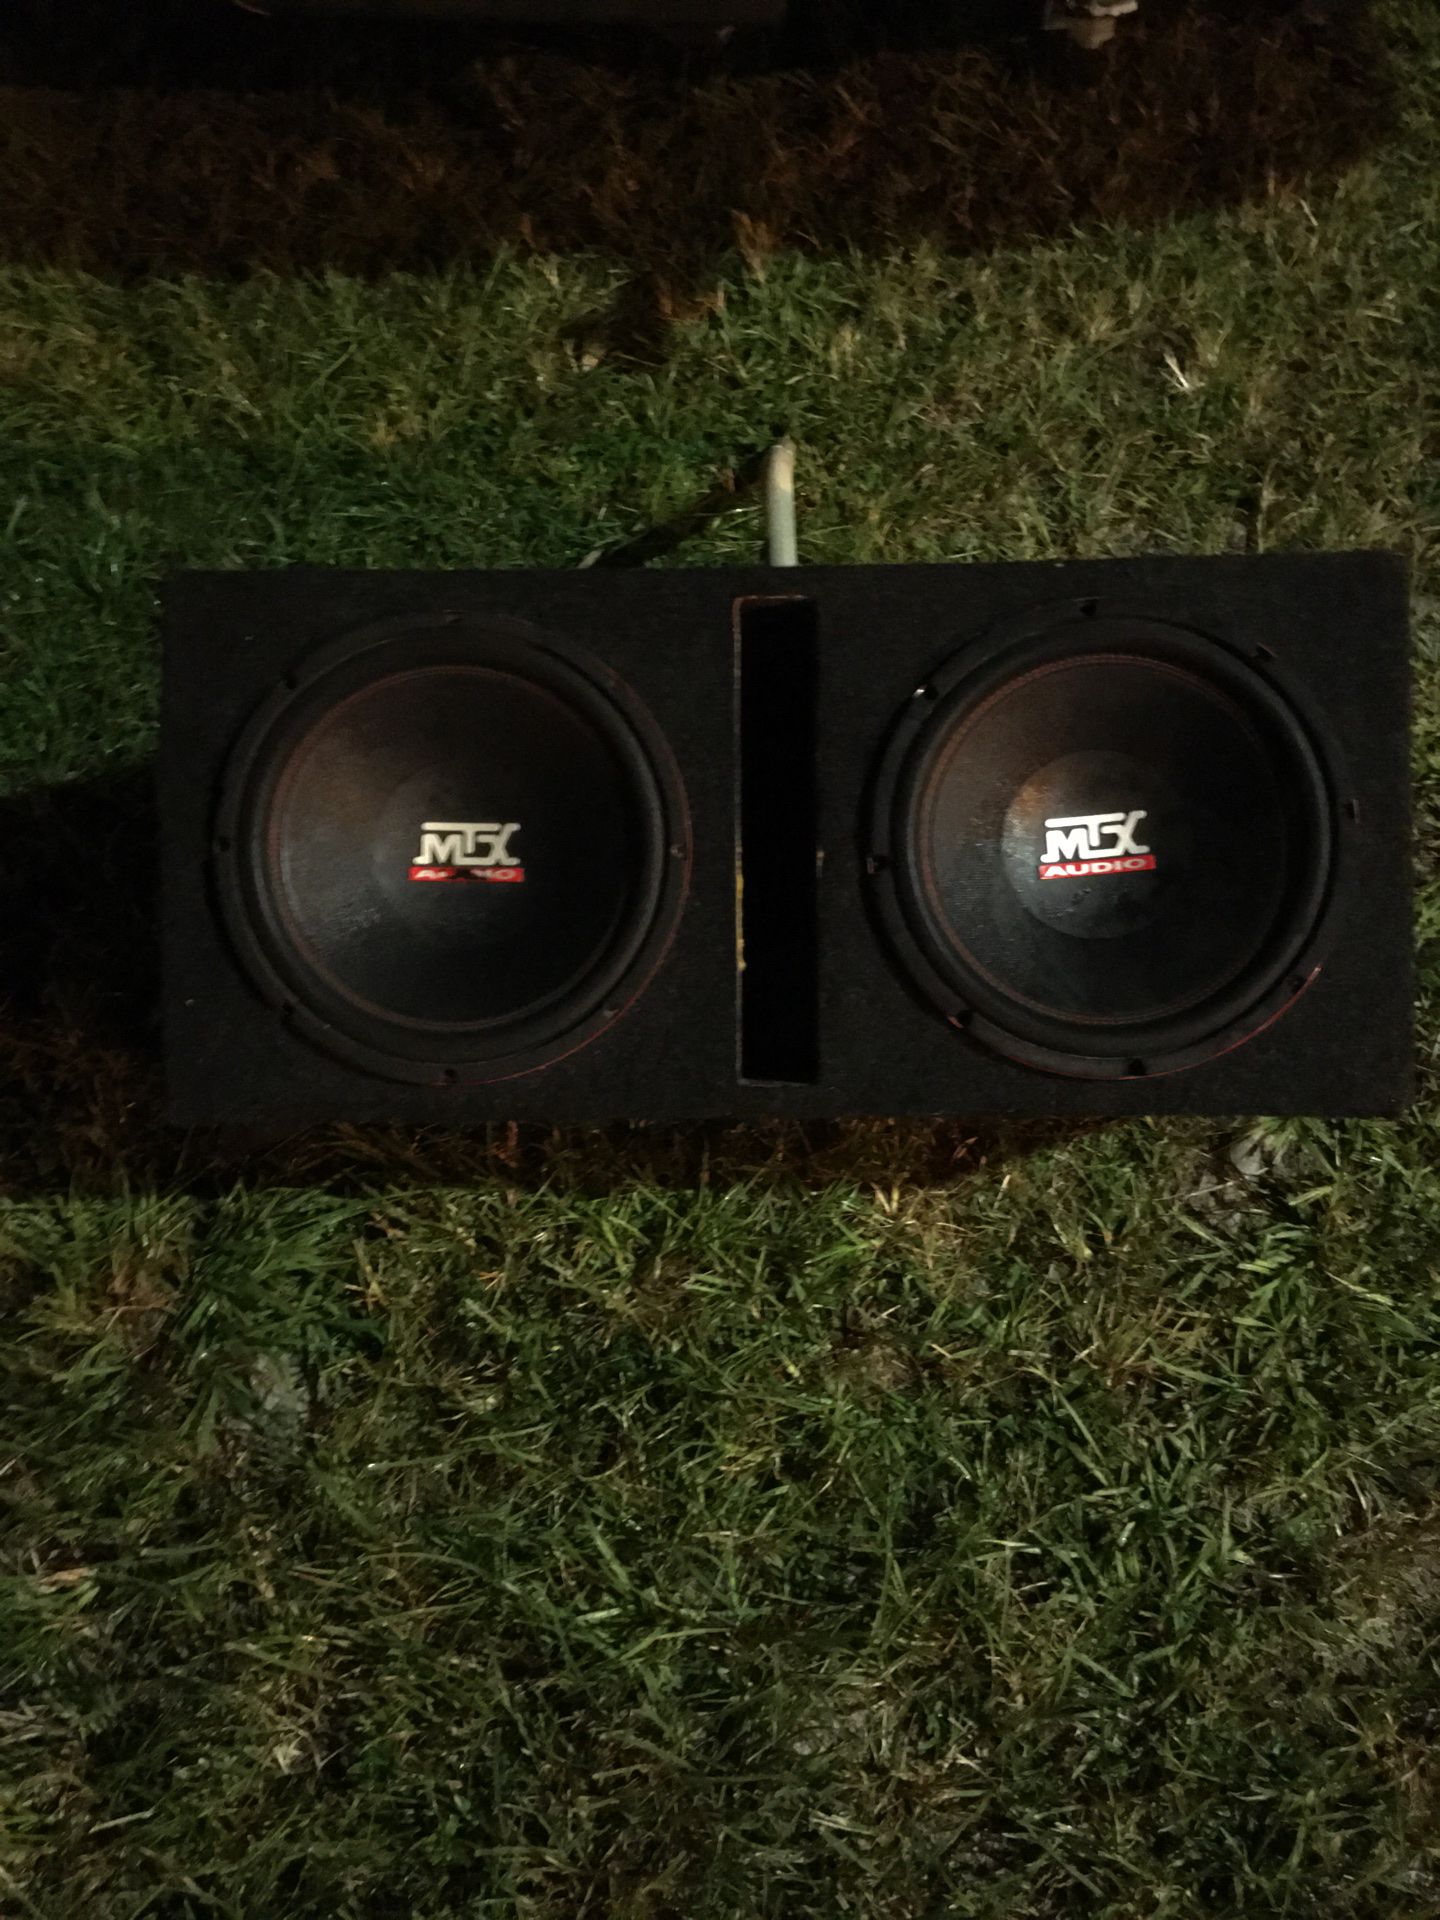 MTX 12” inch subwoofers in ported box